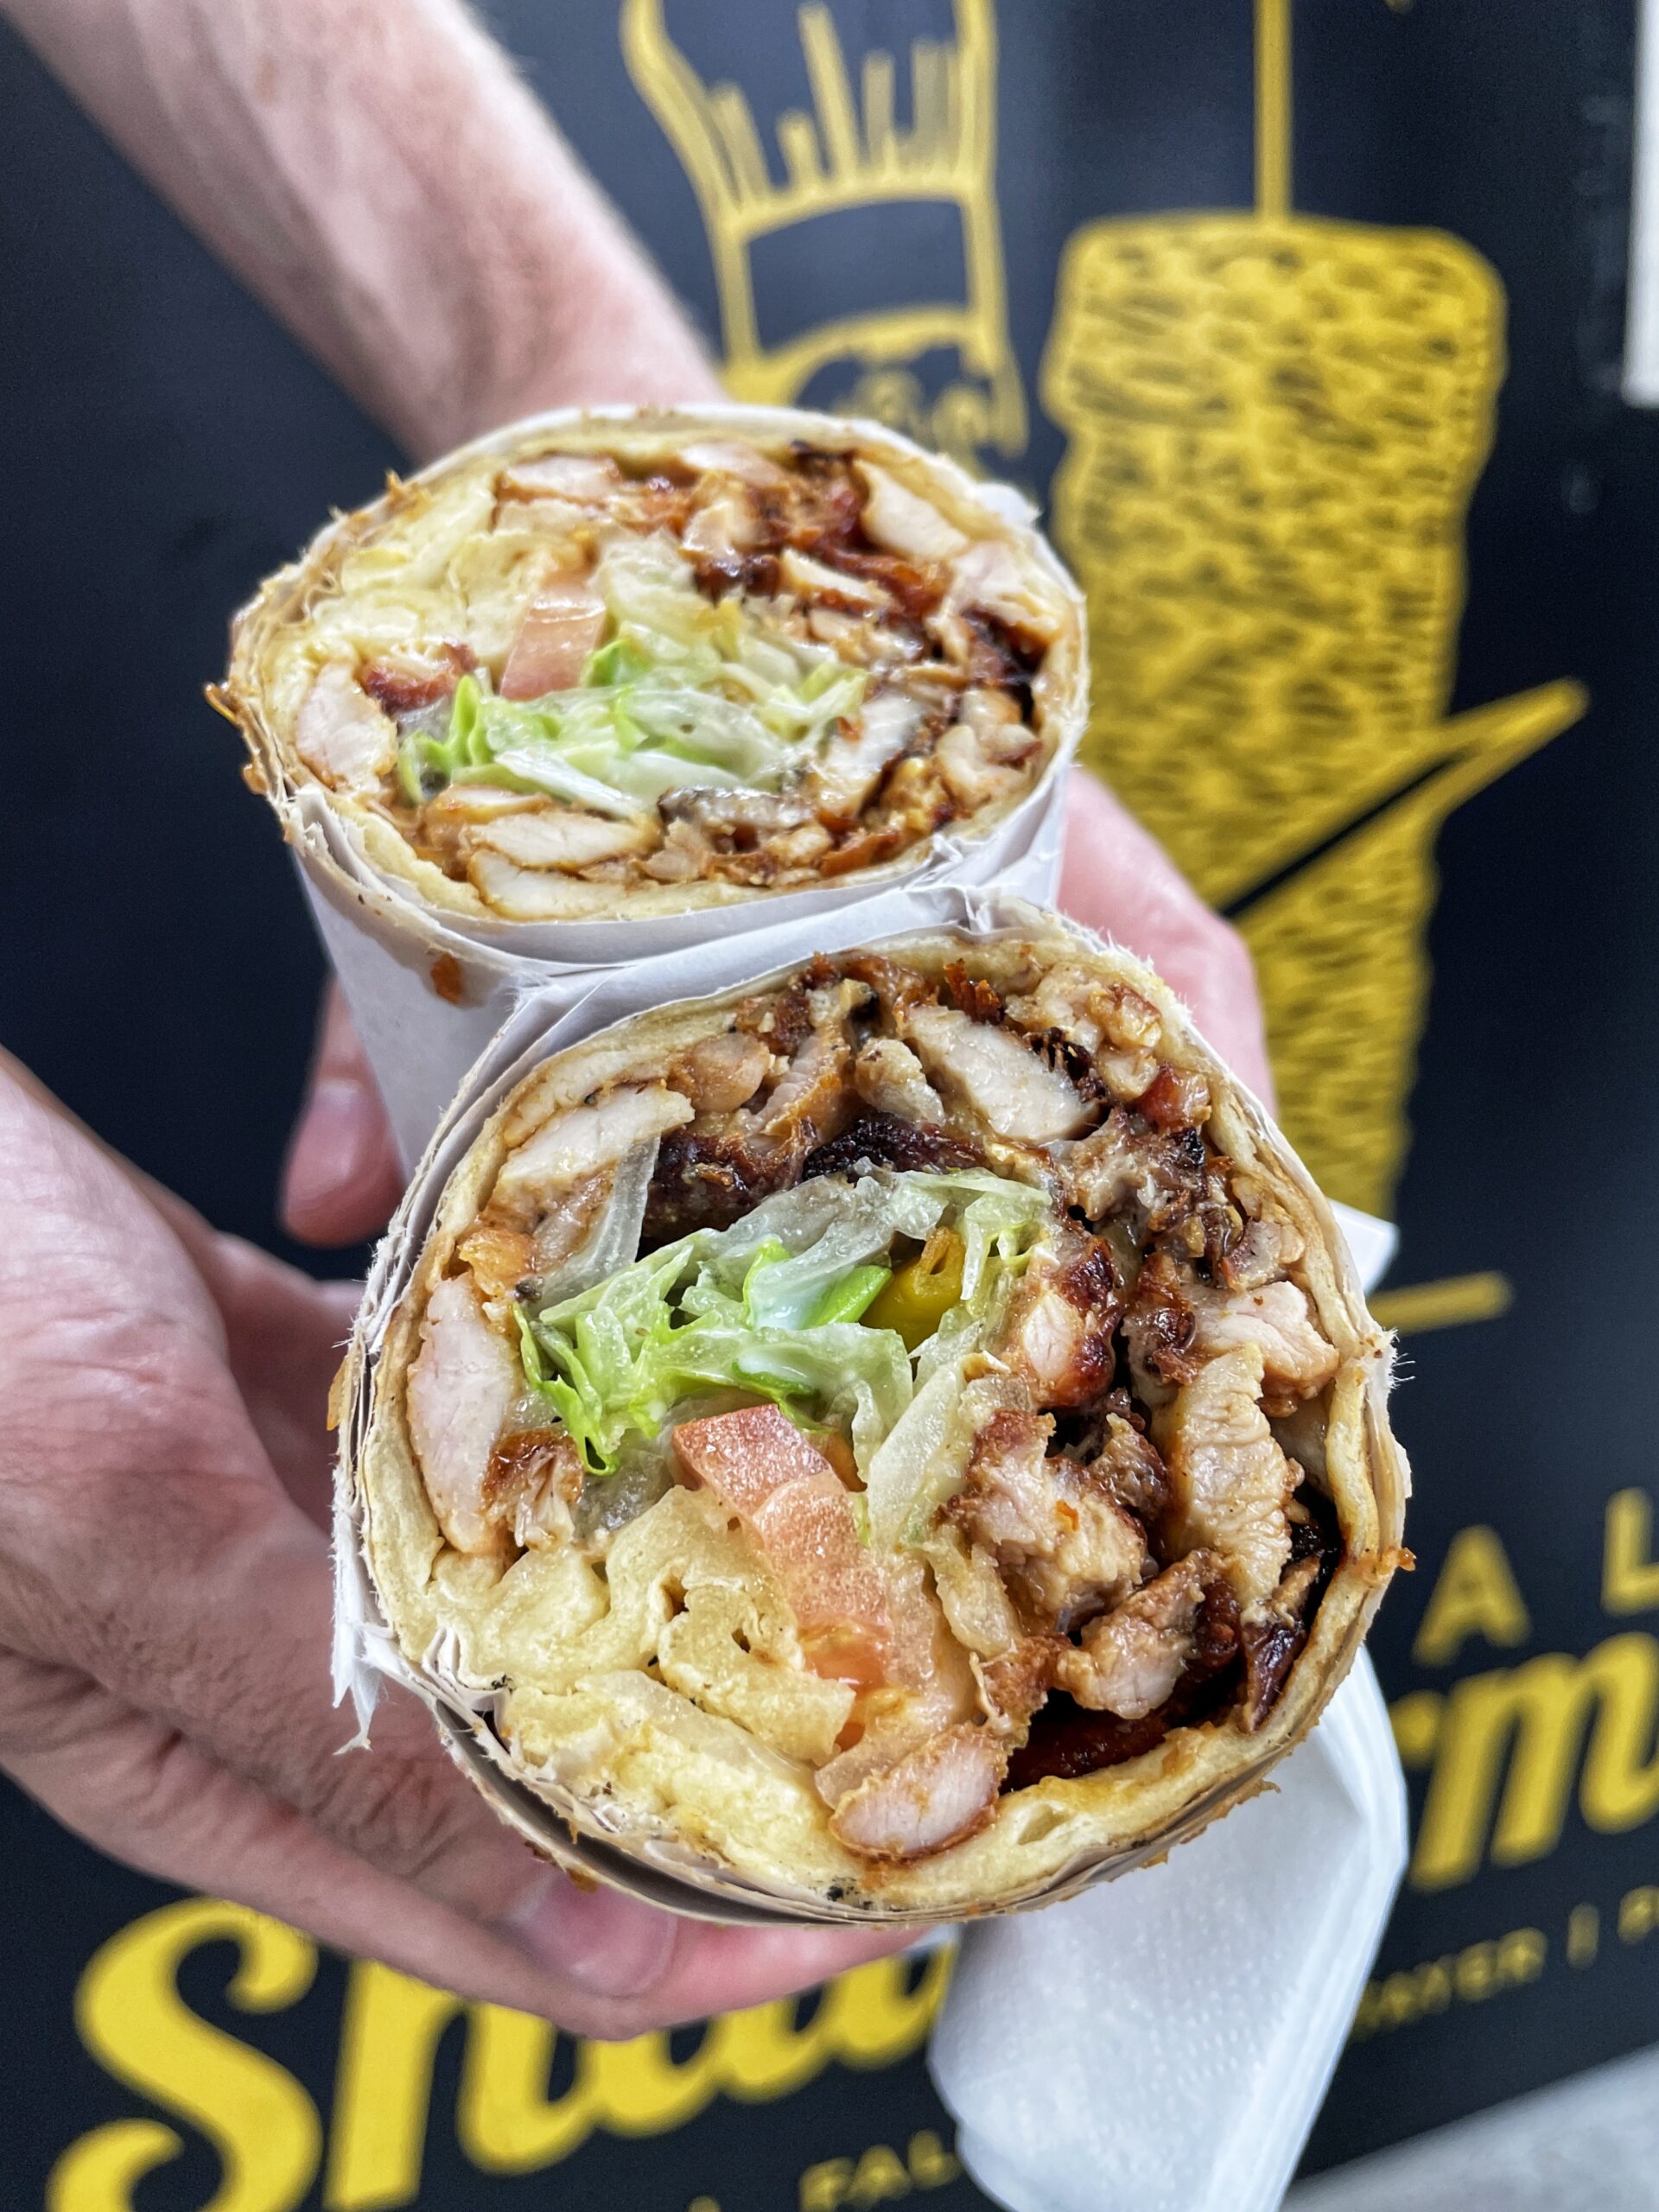 The neat kebab wraps at Arndale Shawarma in Manchester